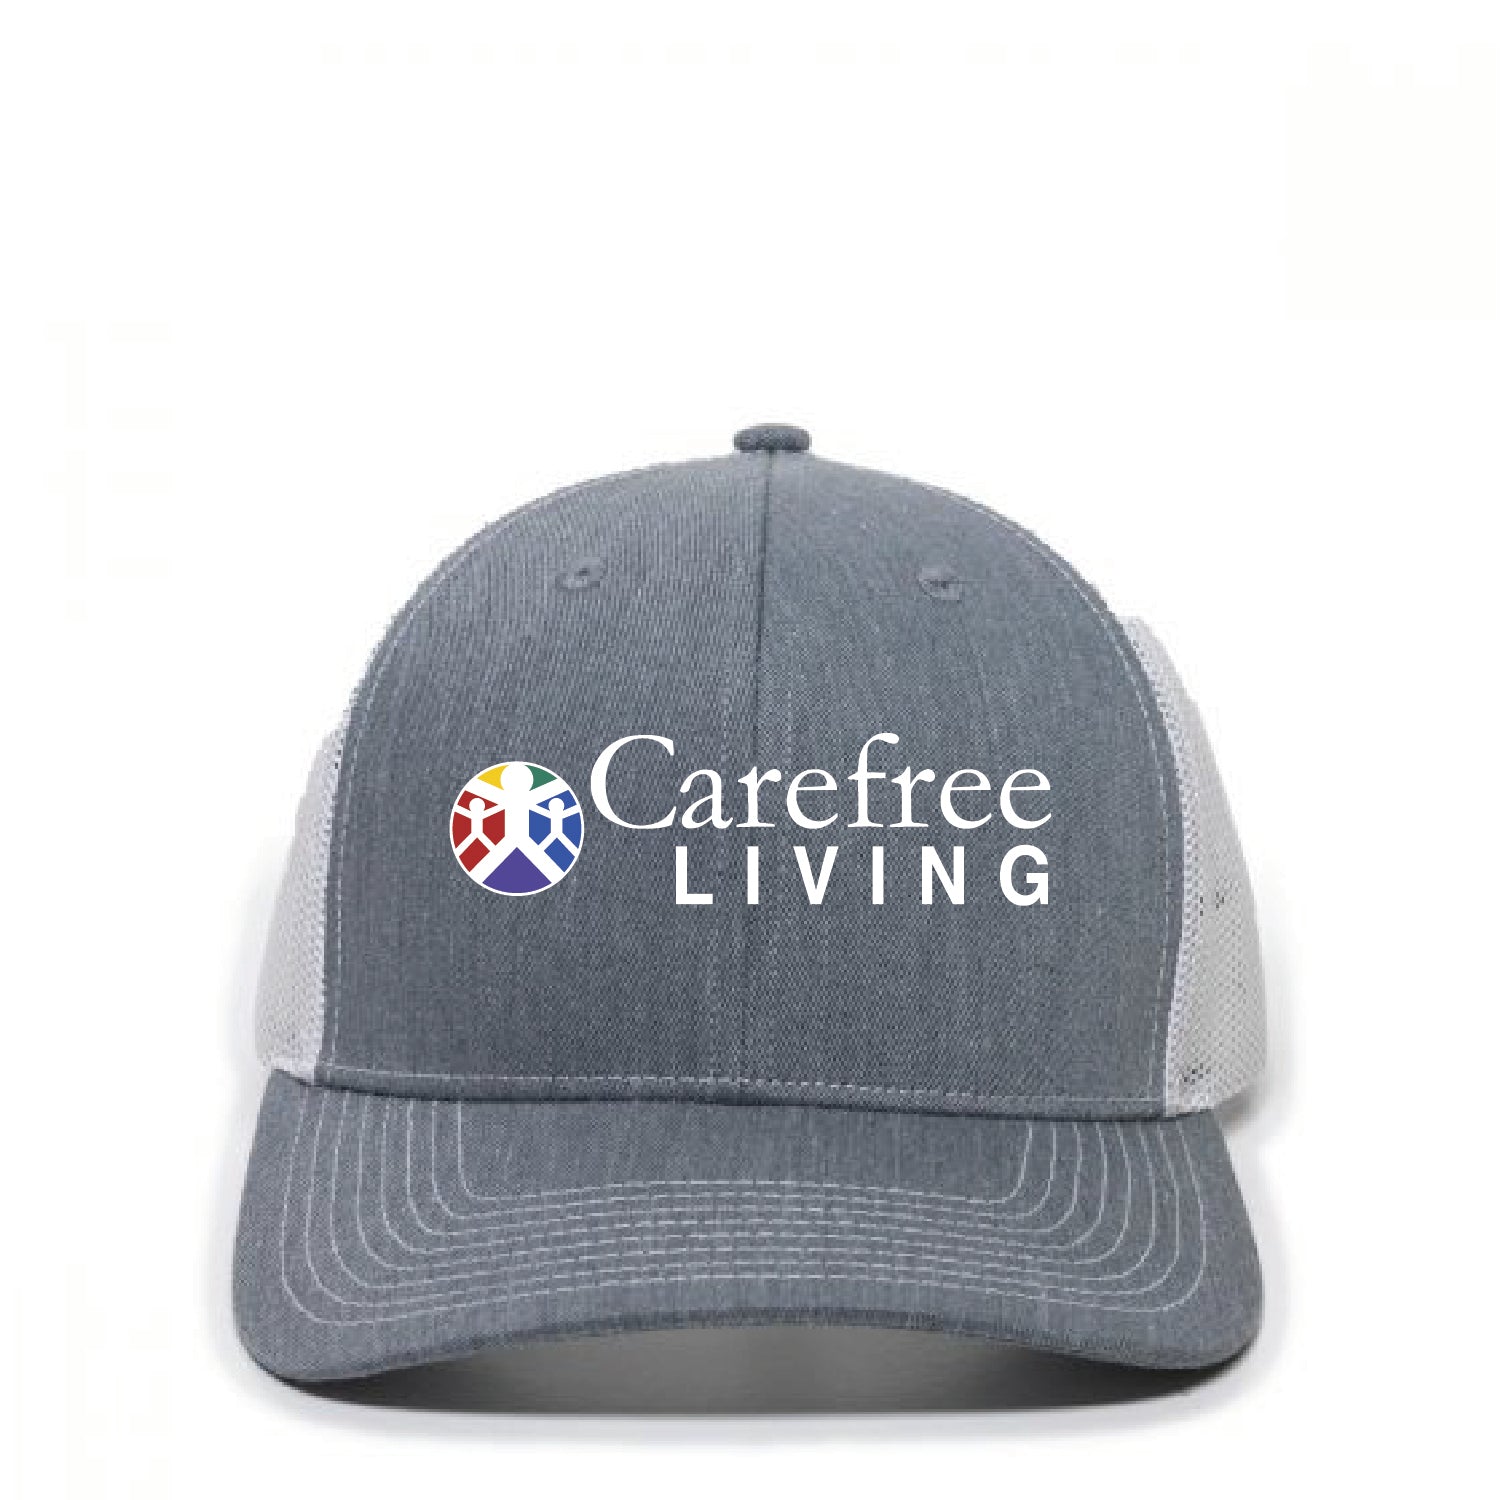 Carefree Living Trucker Hat - DSP On Demand